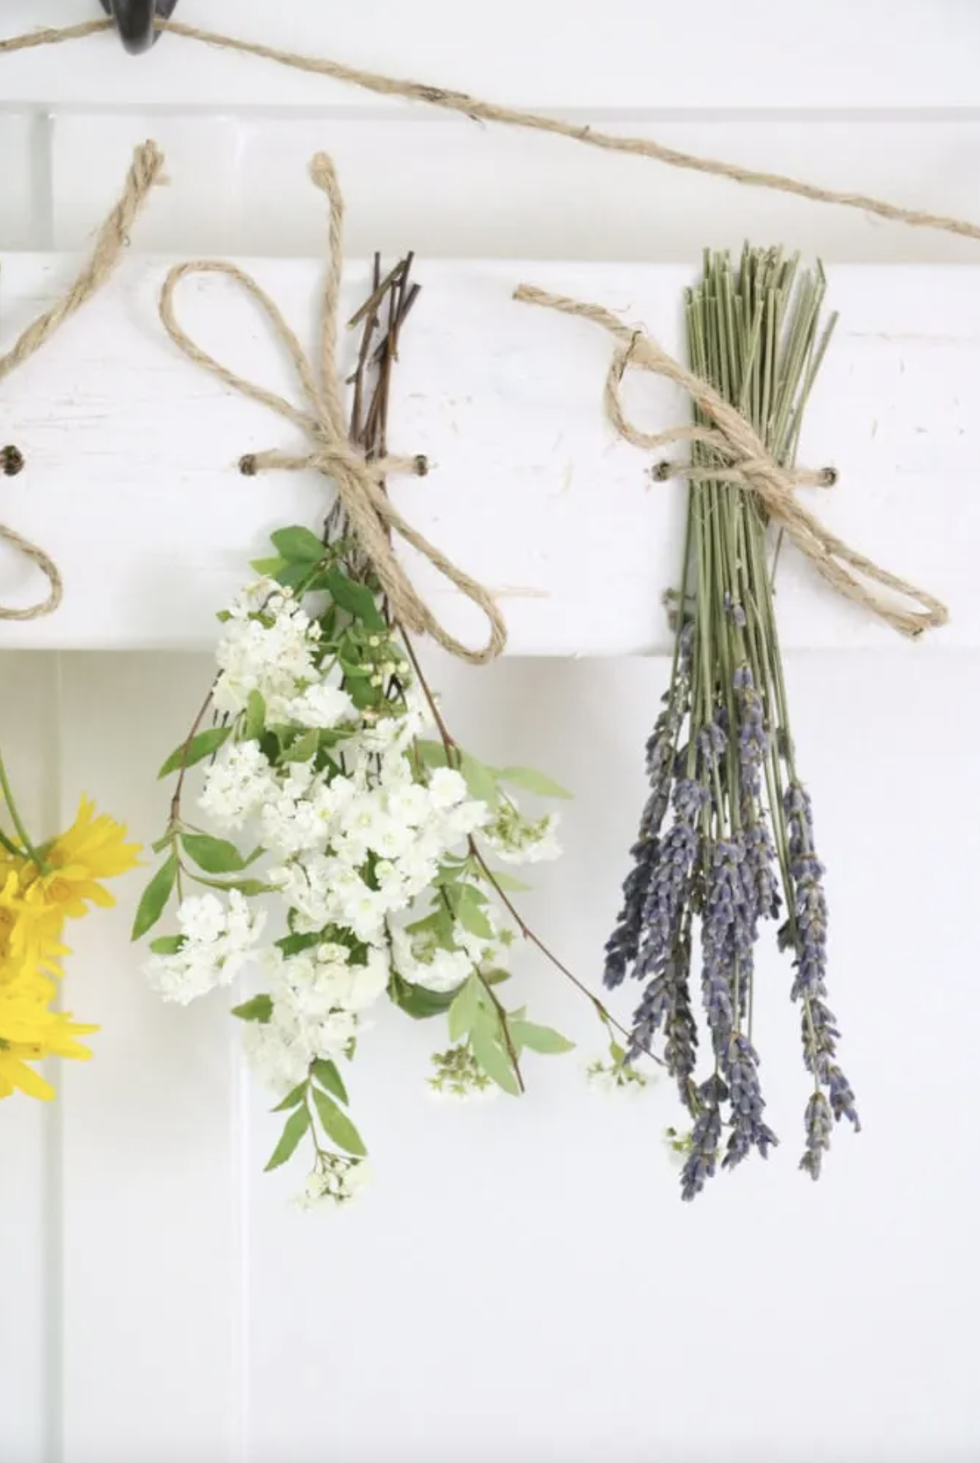 How to Preserve Flowers: 10 Easy, DIY Techniques